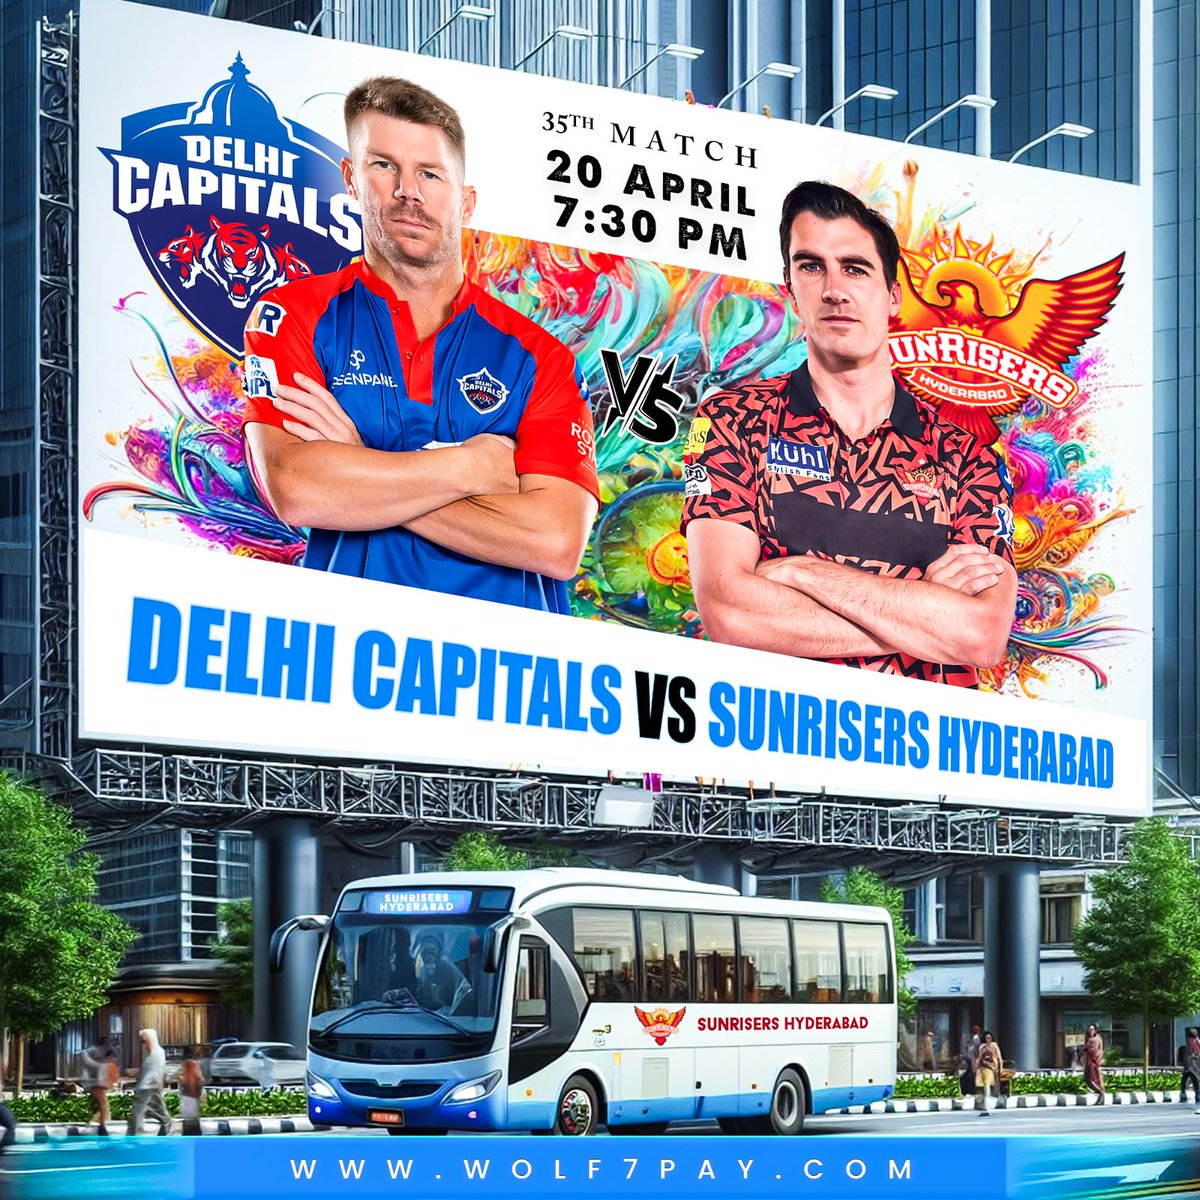 Get ready for an exciting showdown between Delhi Capitals and Sunrisers Hyderabad! Who will come out on top in this important match? #wolf7pay #DC #SRH #IPL #PatCummins #davidwarner #winbig #PlayNow